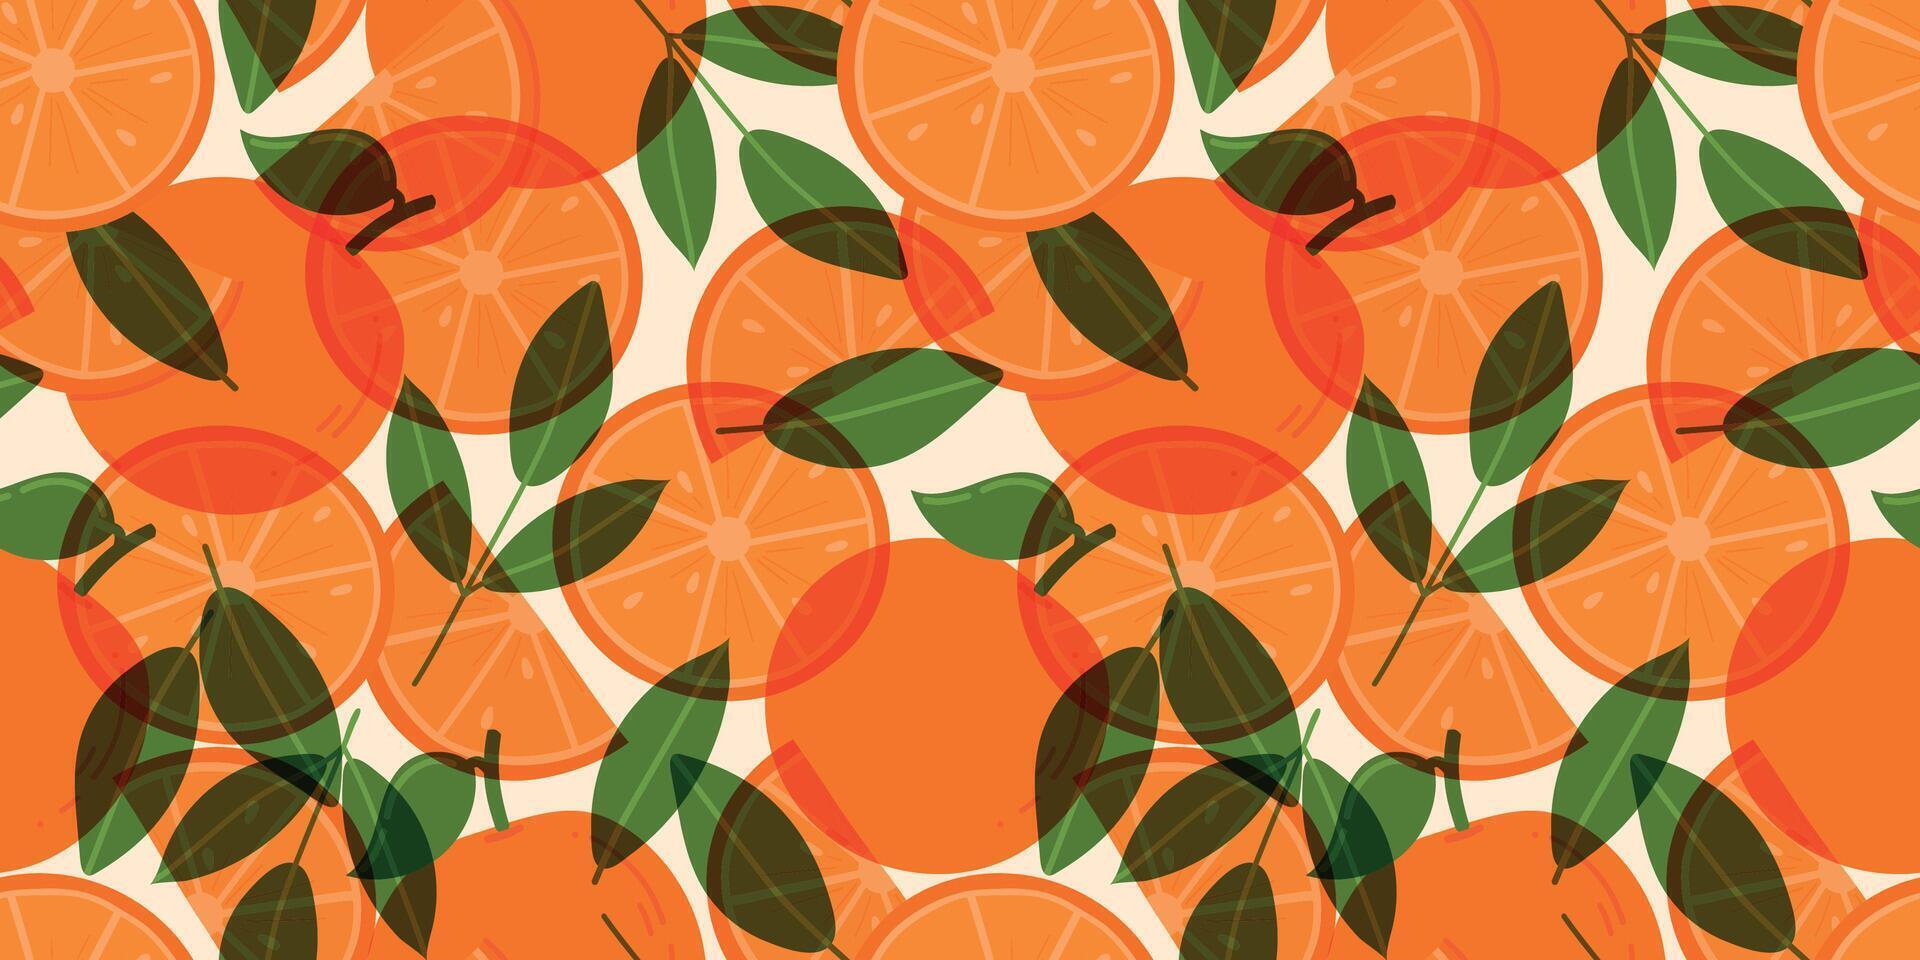 Oranges risoprint seamless pattern. Fresh oranges, leaves and seeds for fabric, drawing labels, wallpaper, fruit background. Slices of oranges background. vector